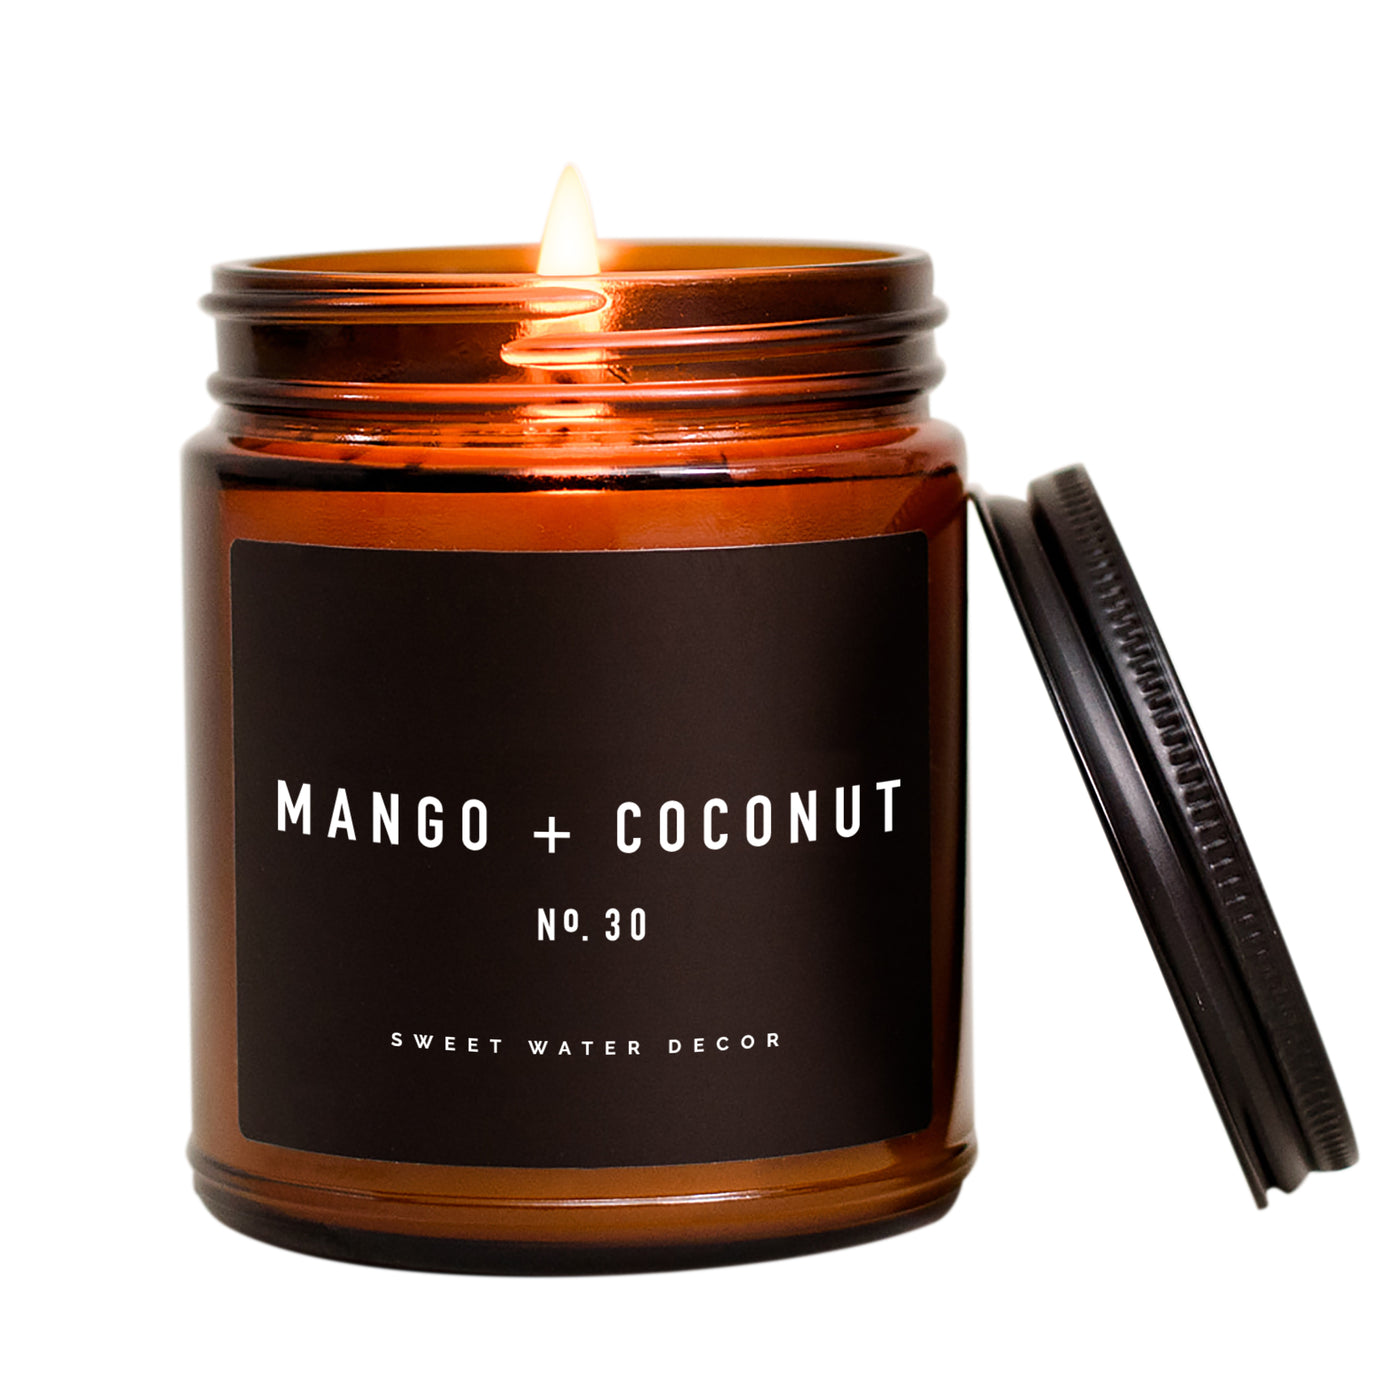 Mango and Coconut Soy Candle - Amber Jar - 9 oz